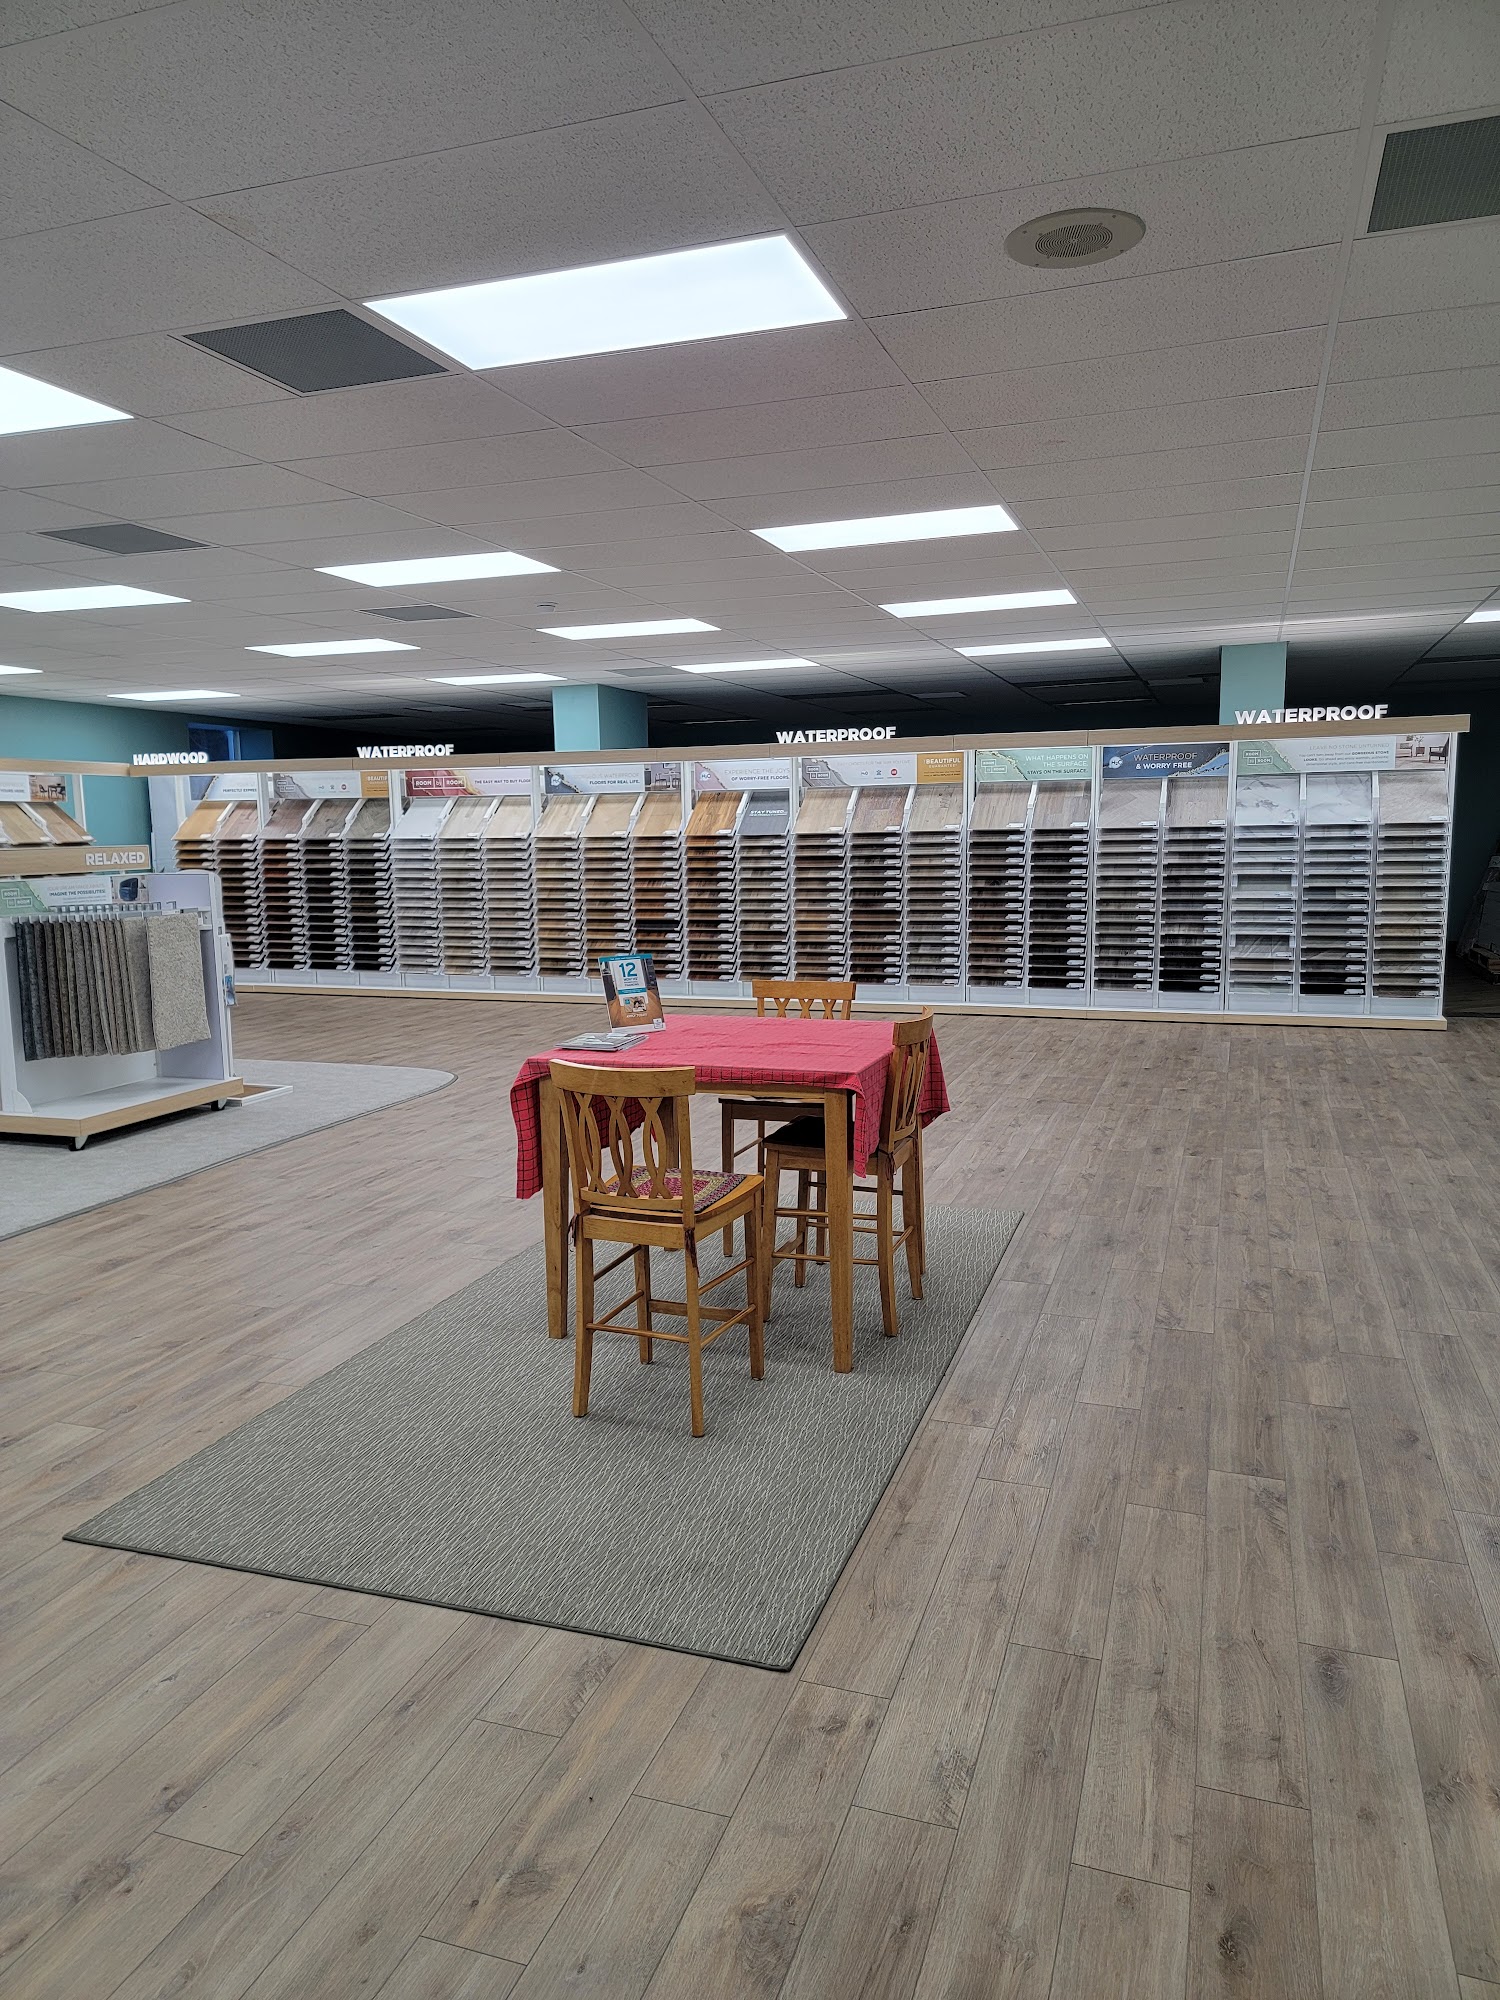 Fike Bros Carpet One Floor & Home 338 S Main St, Yeagertown Pennsylvania 17099